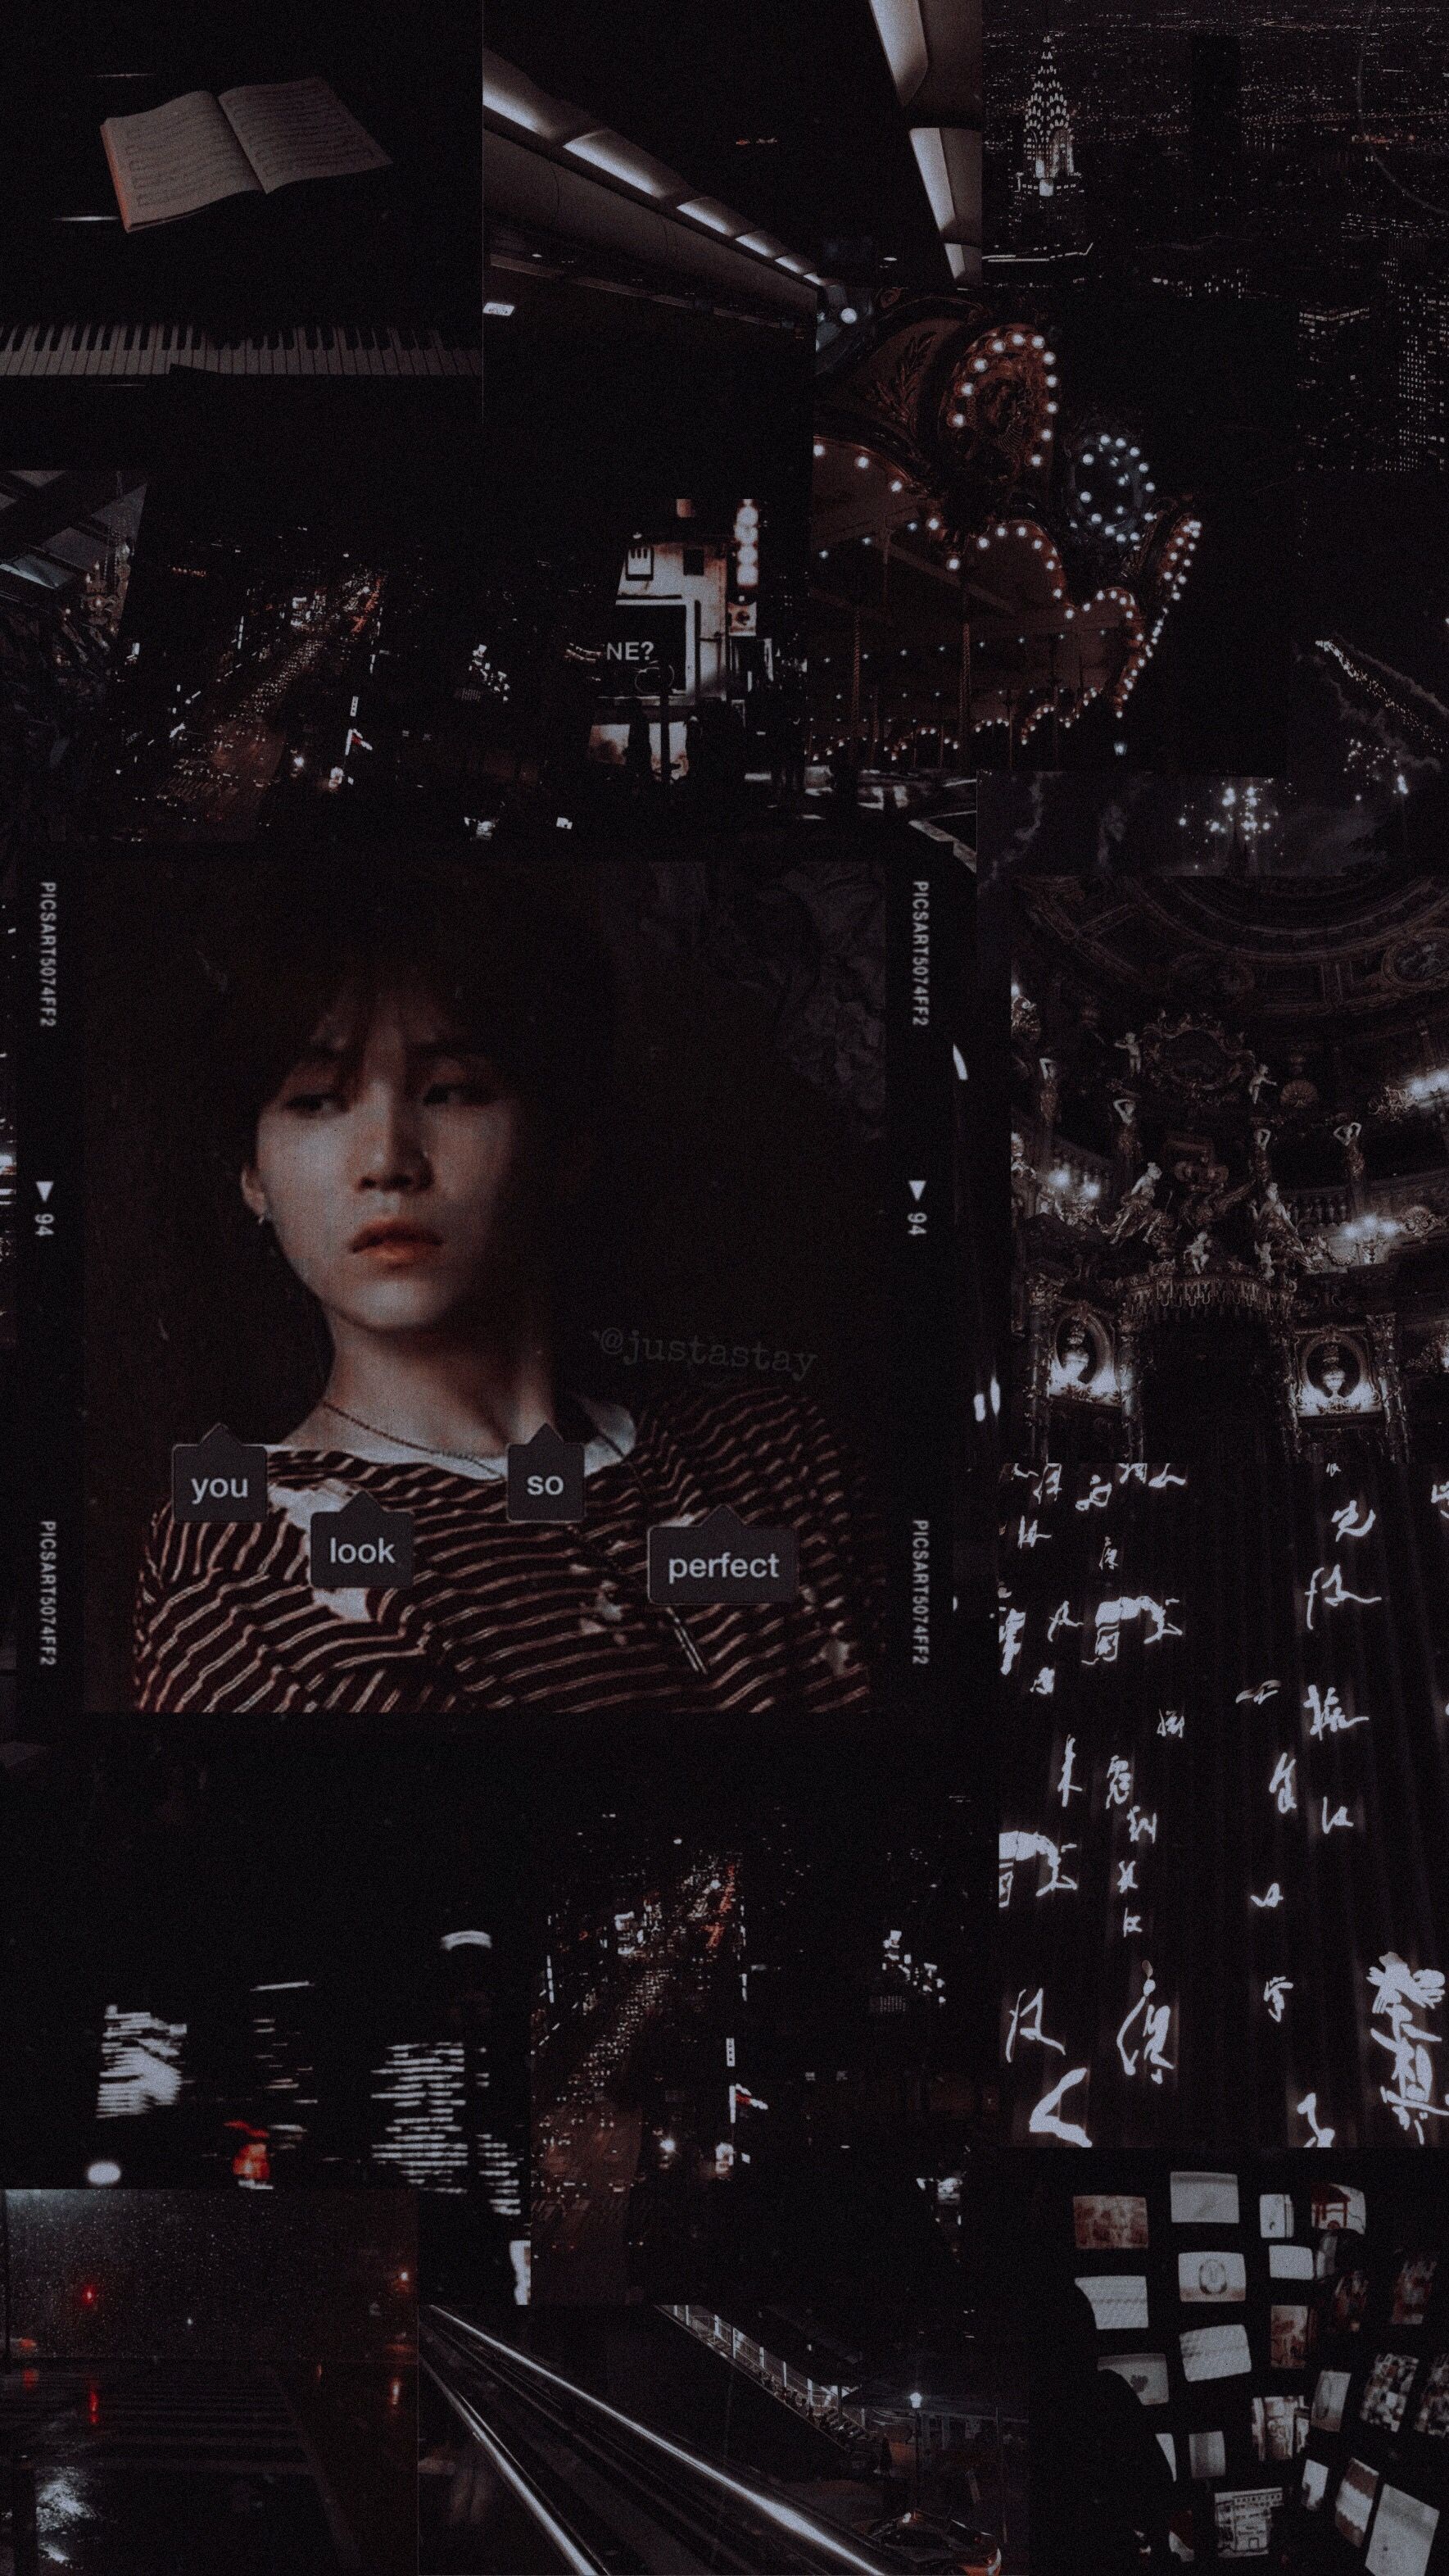 Black aesthetic wallpaper for phone with the picture of a K-pop idol and the night city - Suga